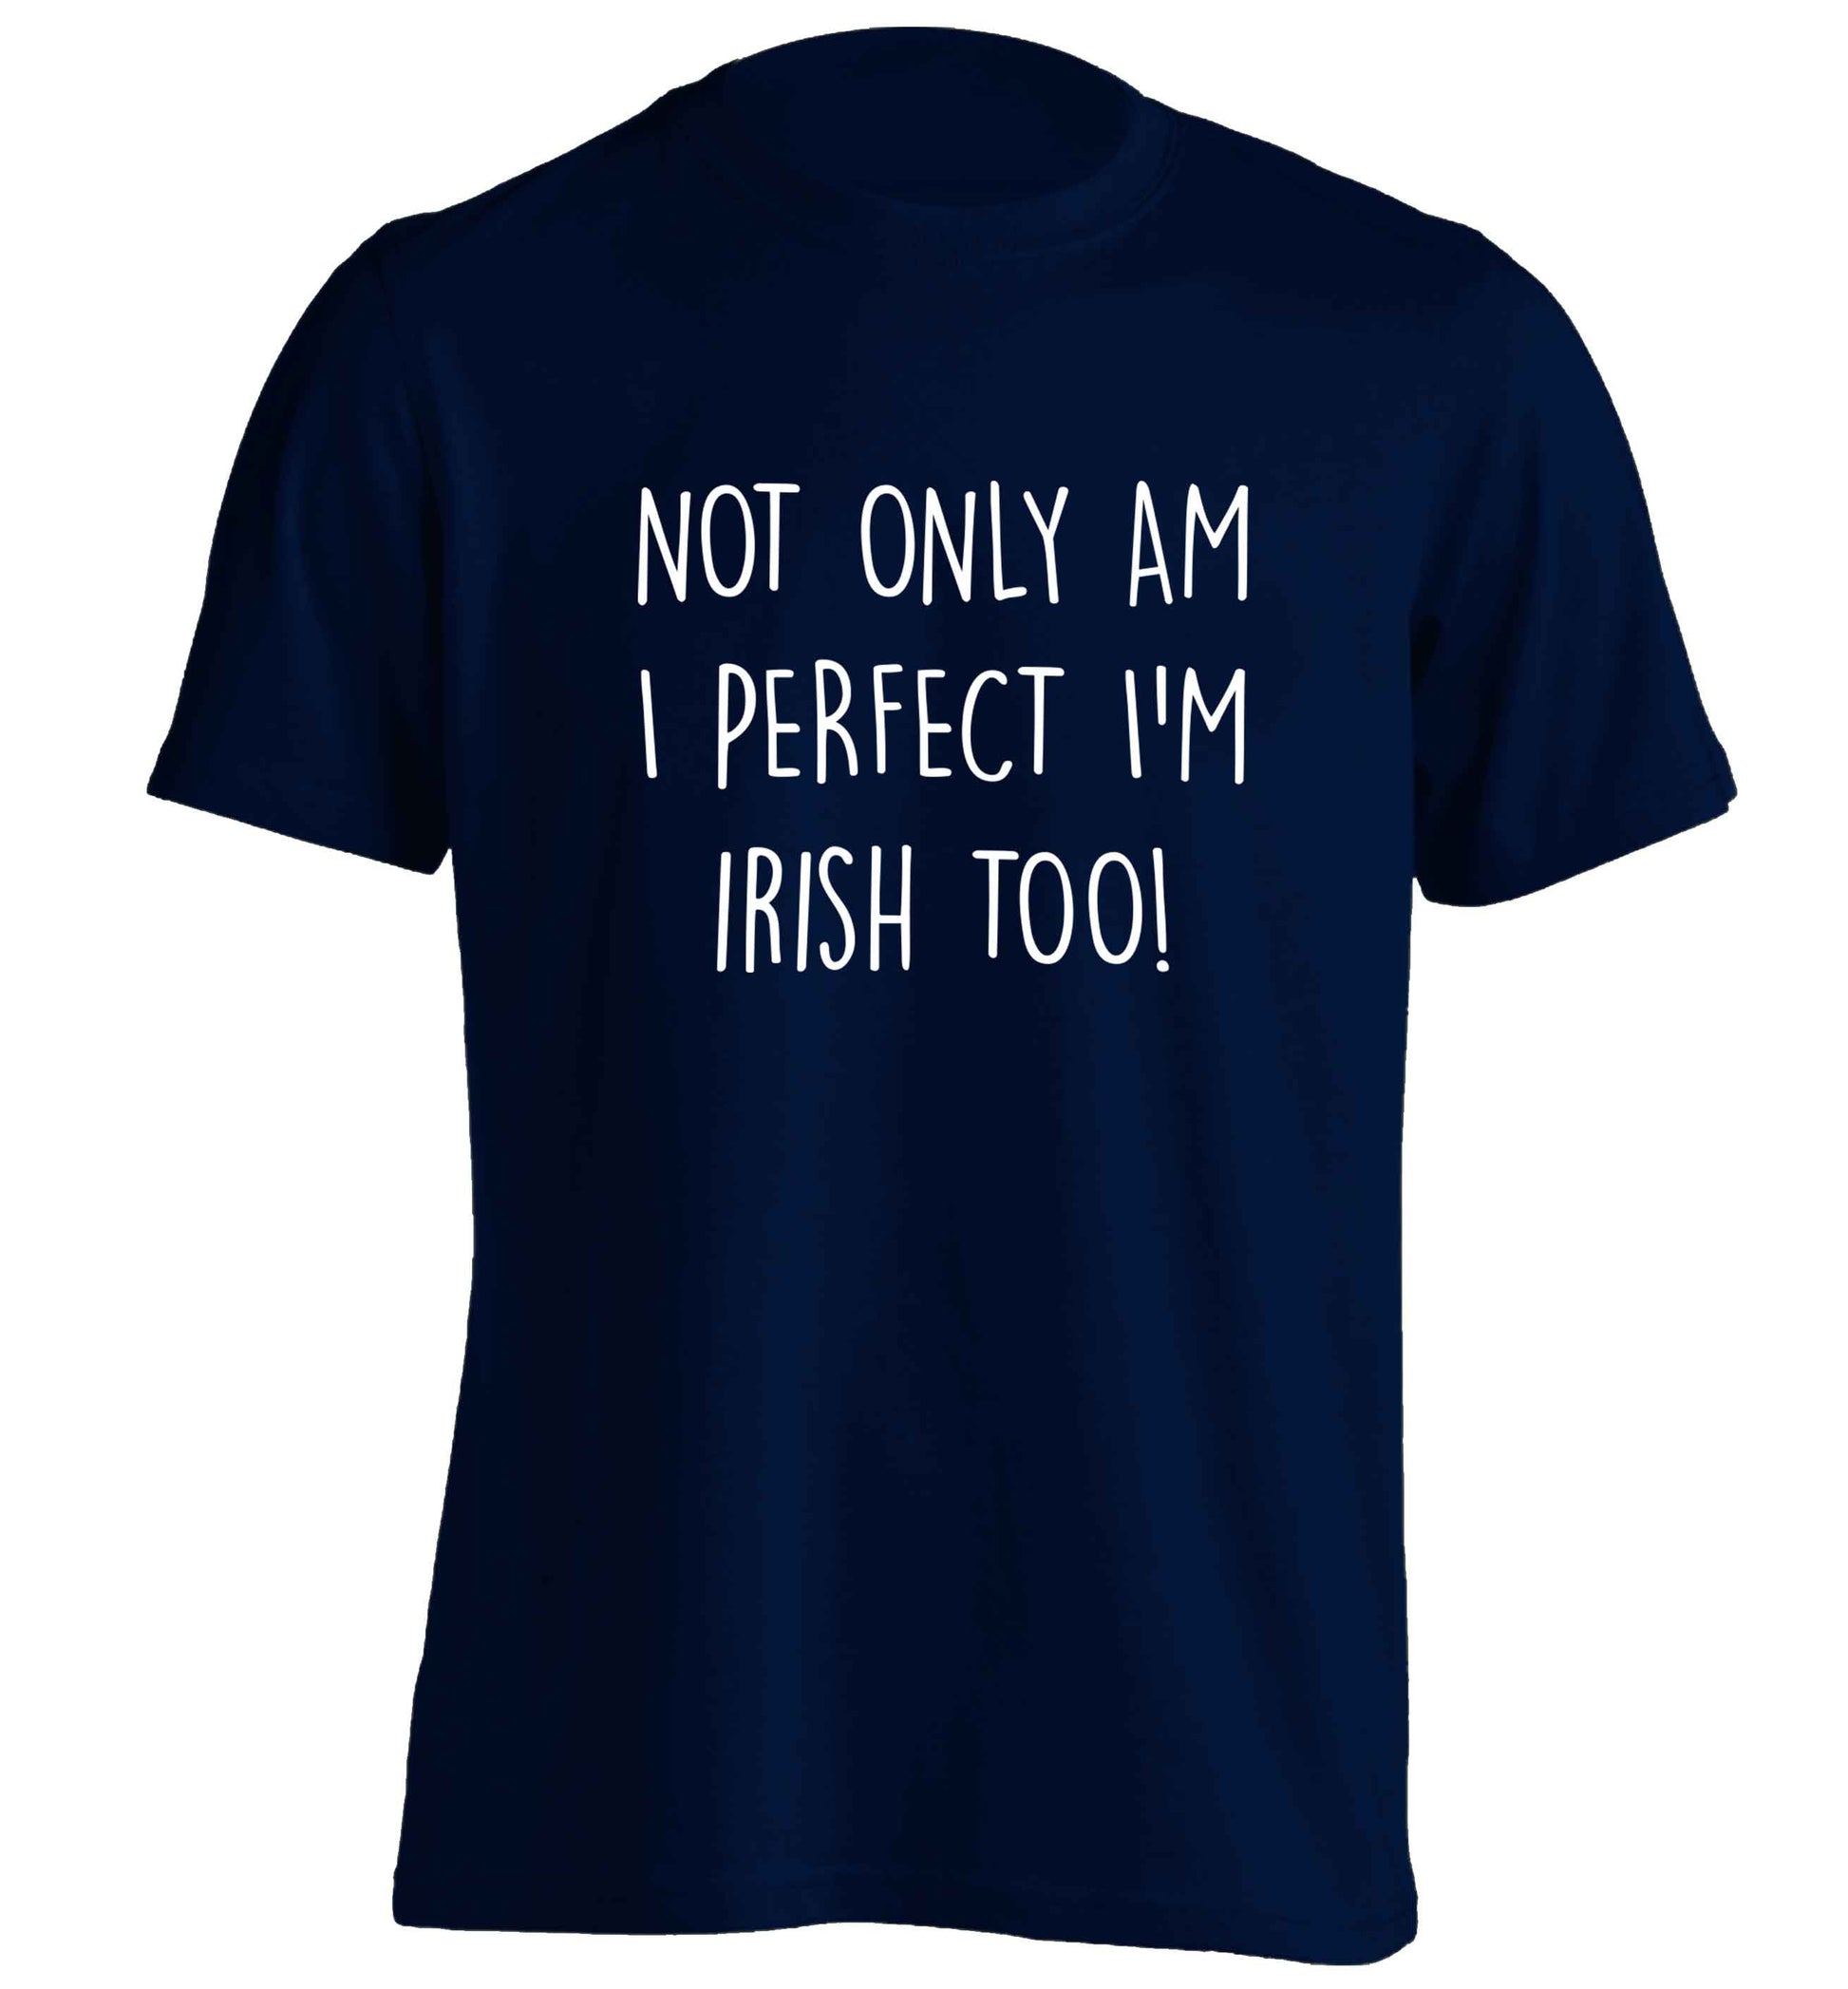 Not only am I perfect I'm Irish too! adults unisex navy Tshirt 2XL